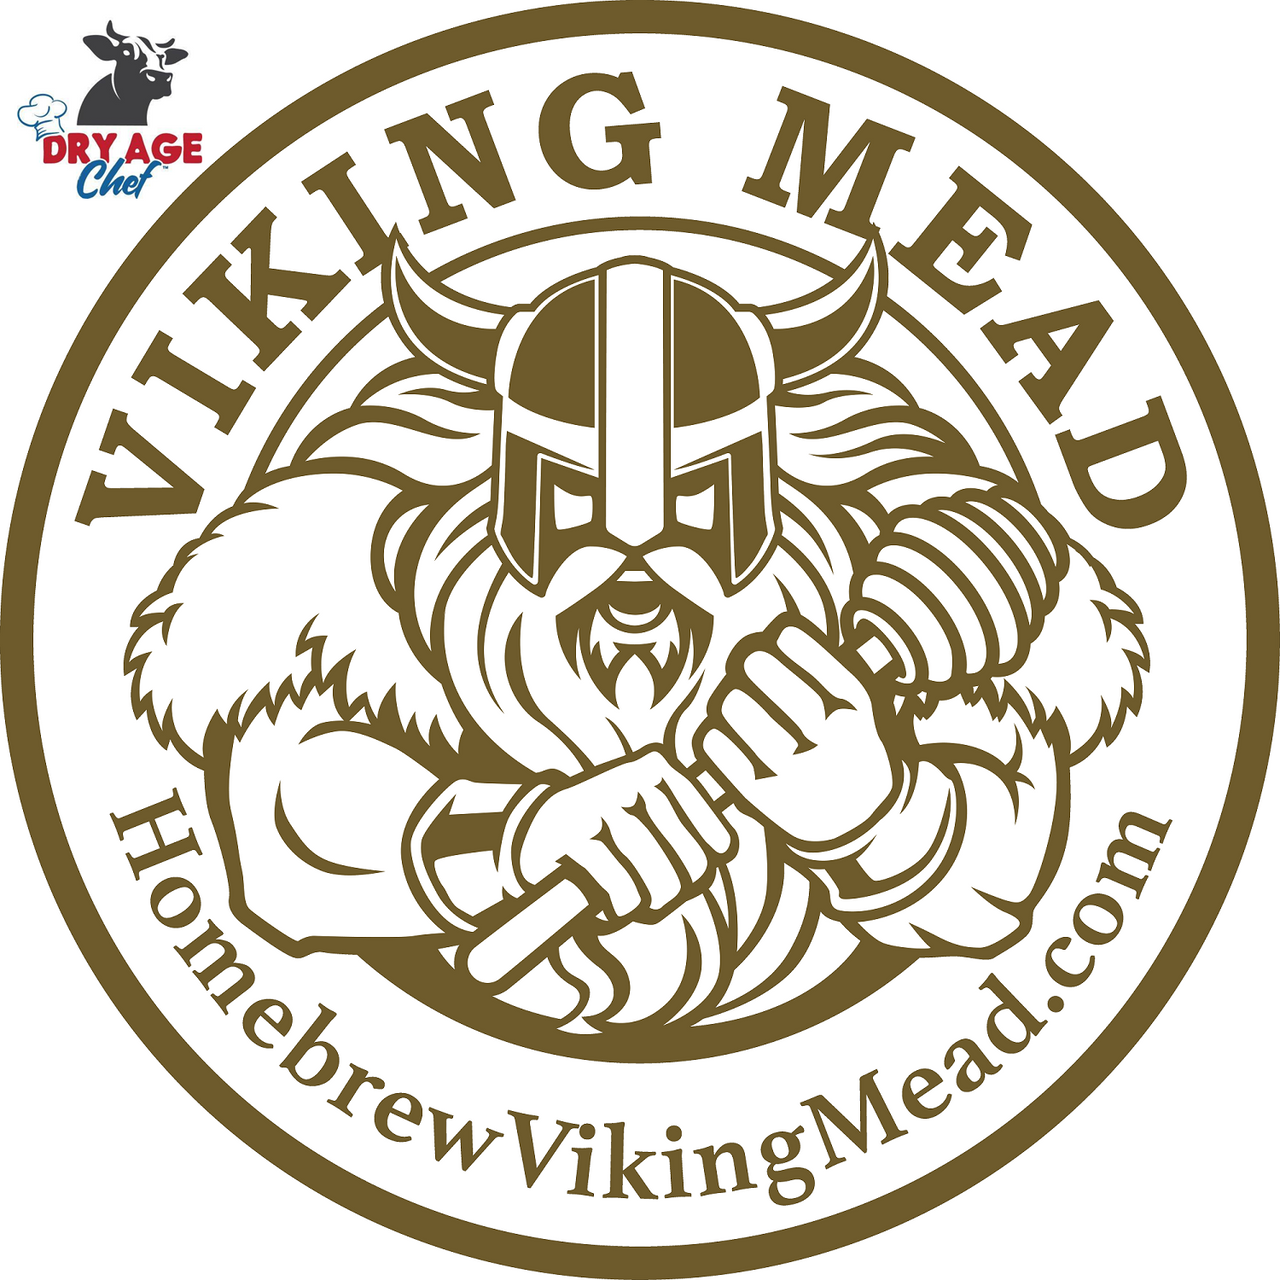 Homebrew Viking Mead Making Kit by Dry Age Chef